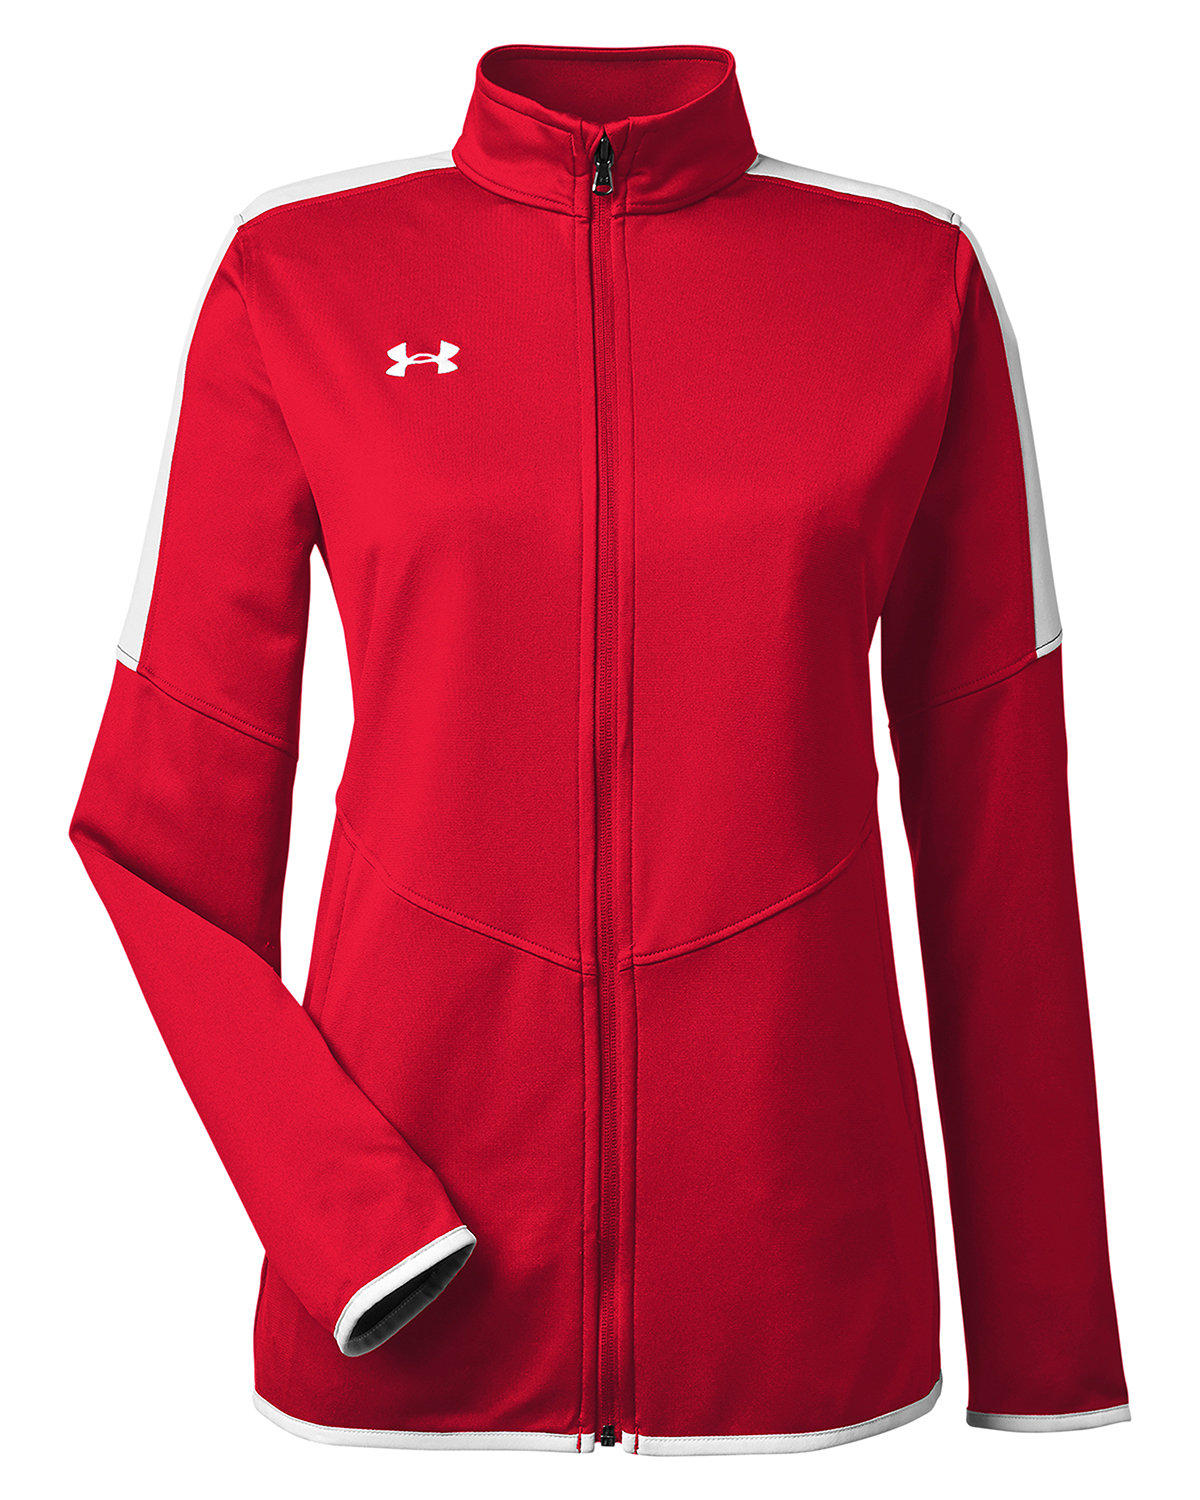 Custom Branded Under Armour Jackets - Red